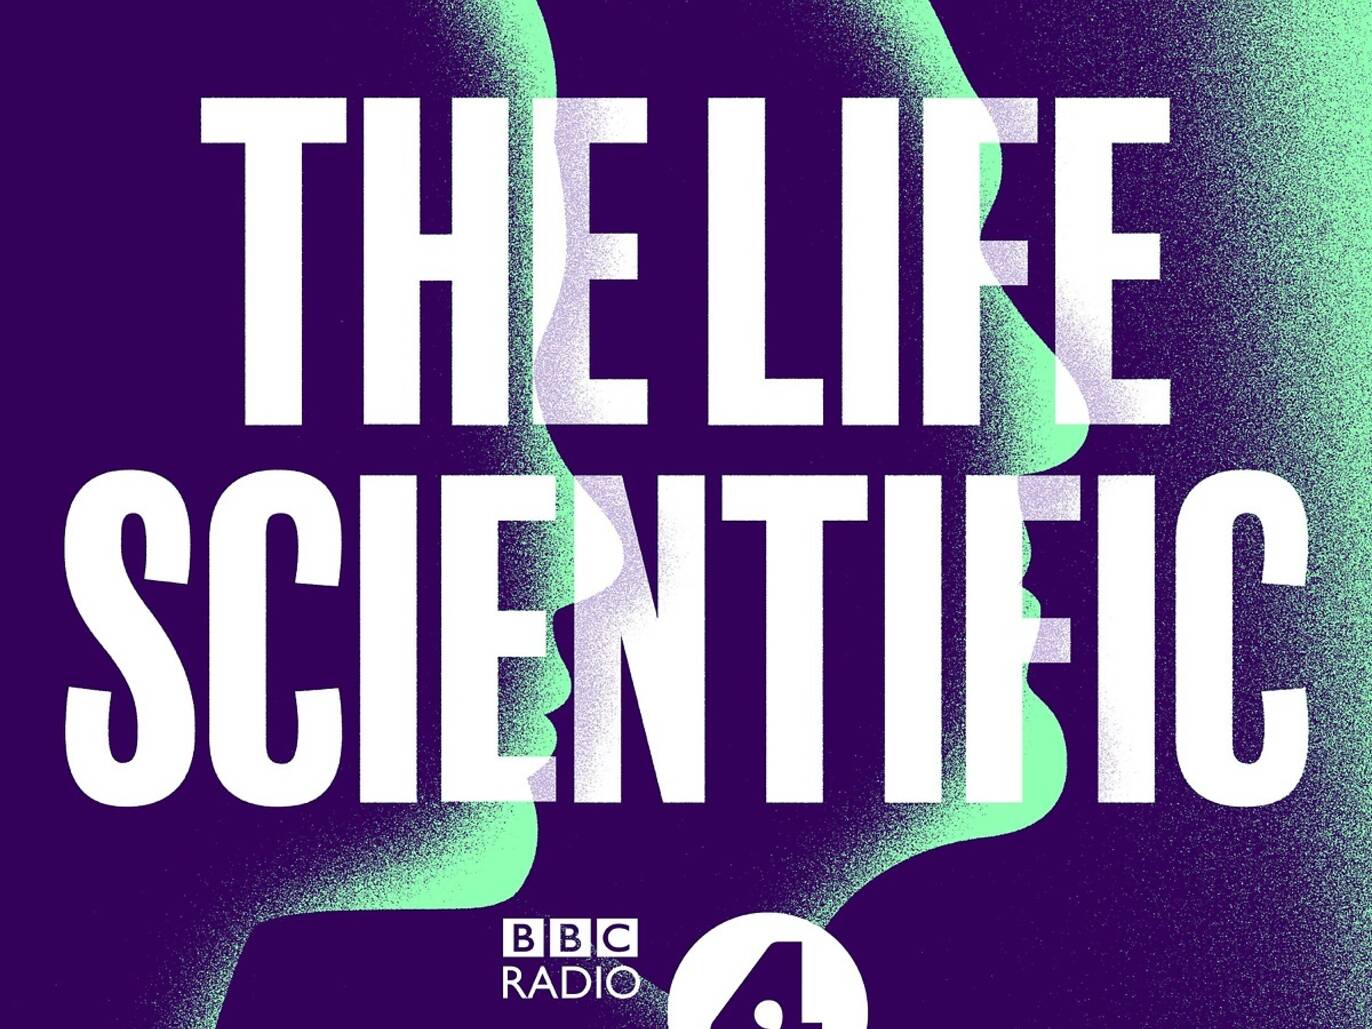 15 Best Science Podcasts For Getting Seriously Smart